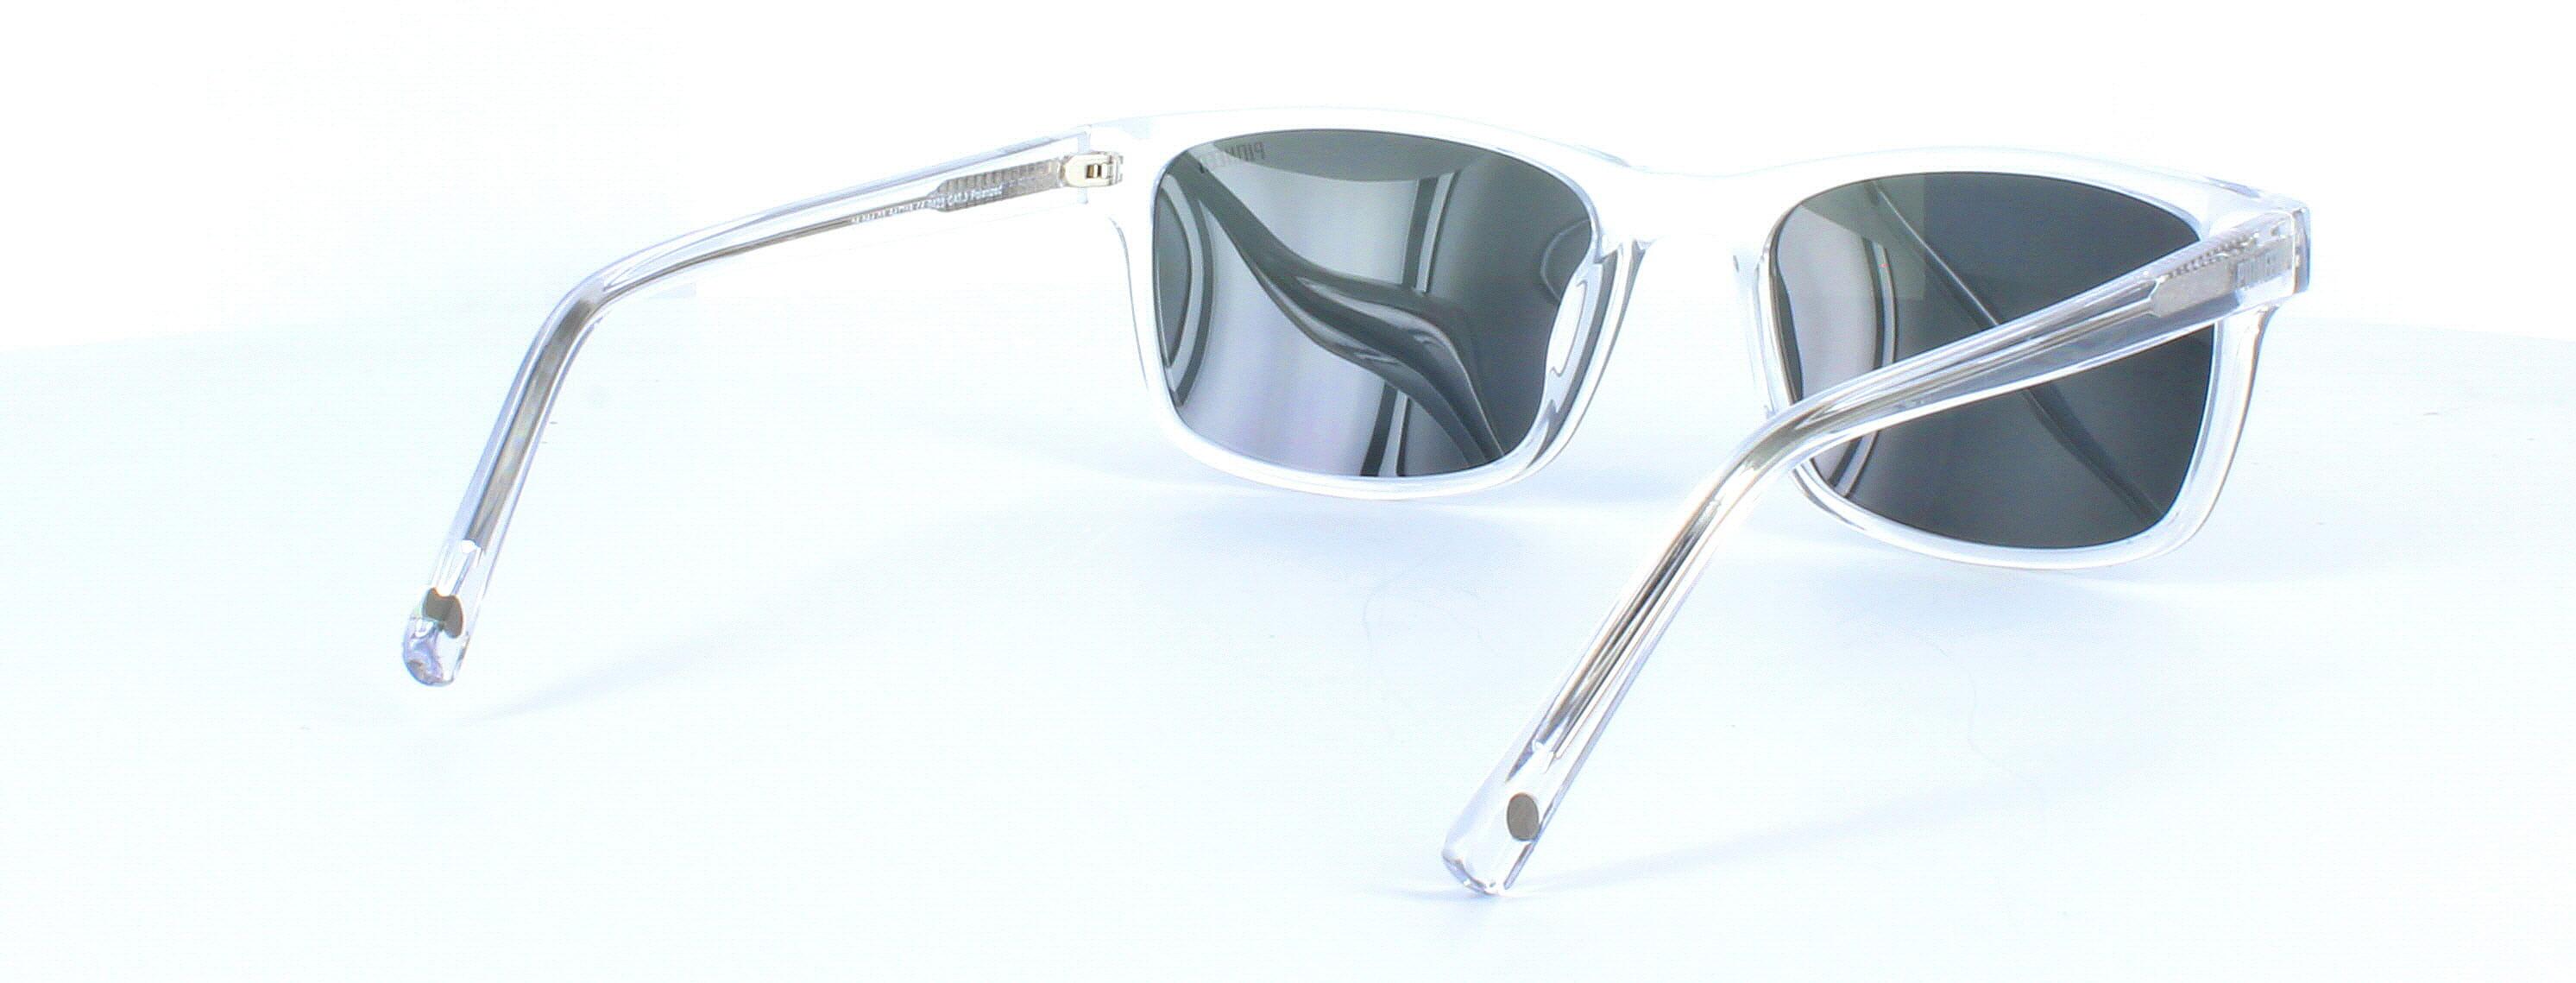 Rocco - clear crystal unisex sunglasses - image view 4